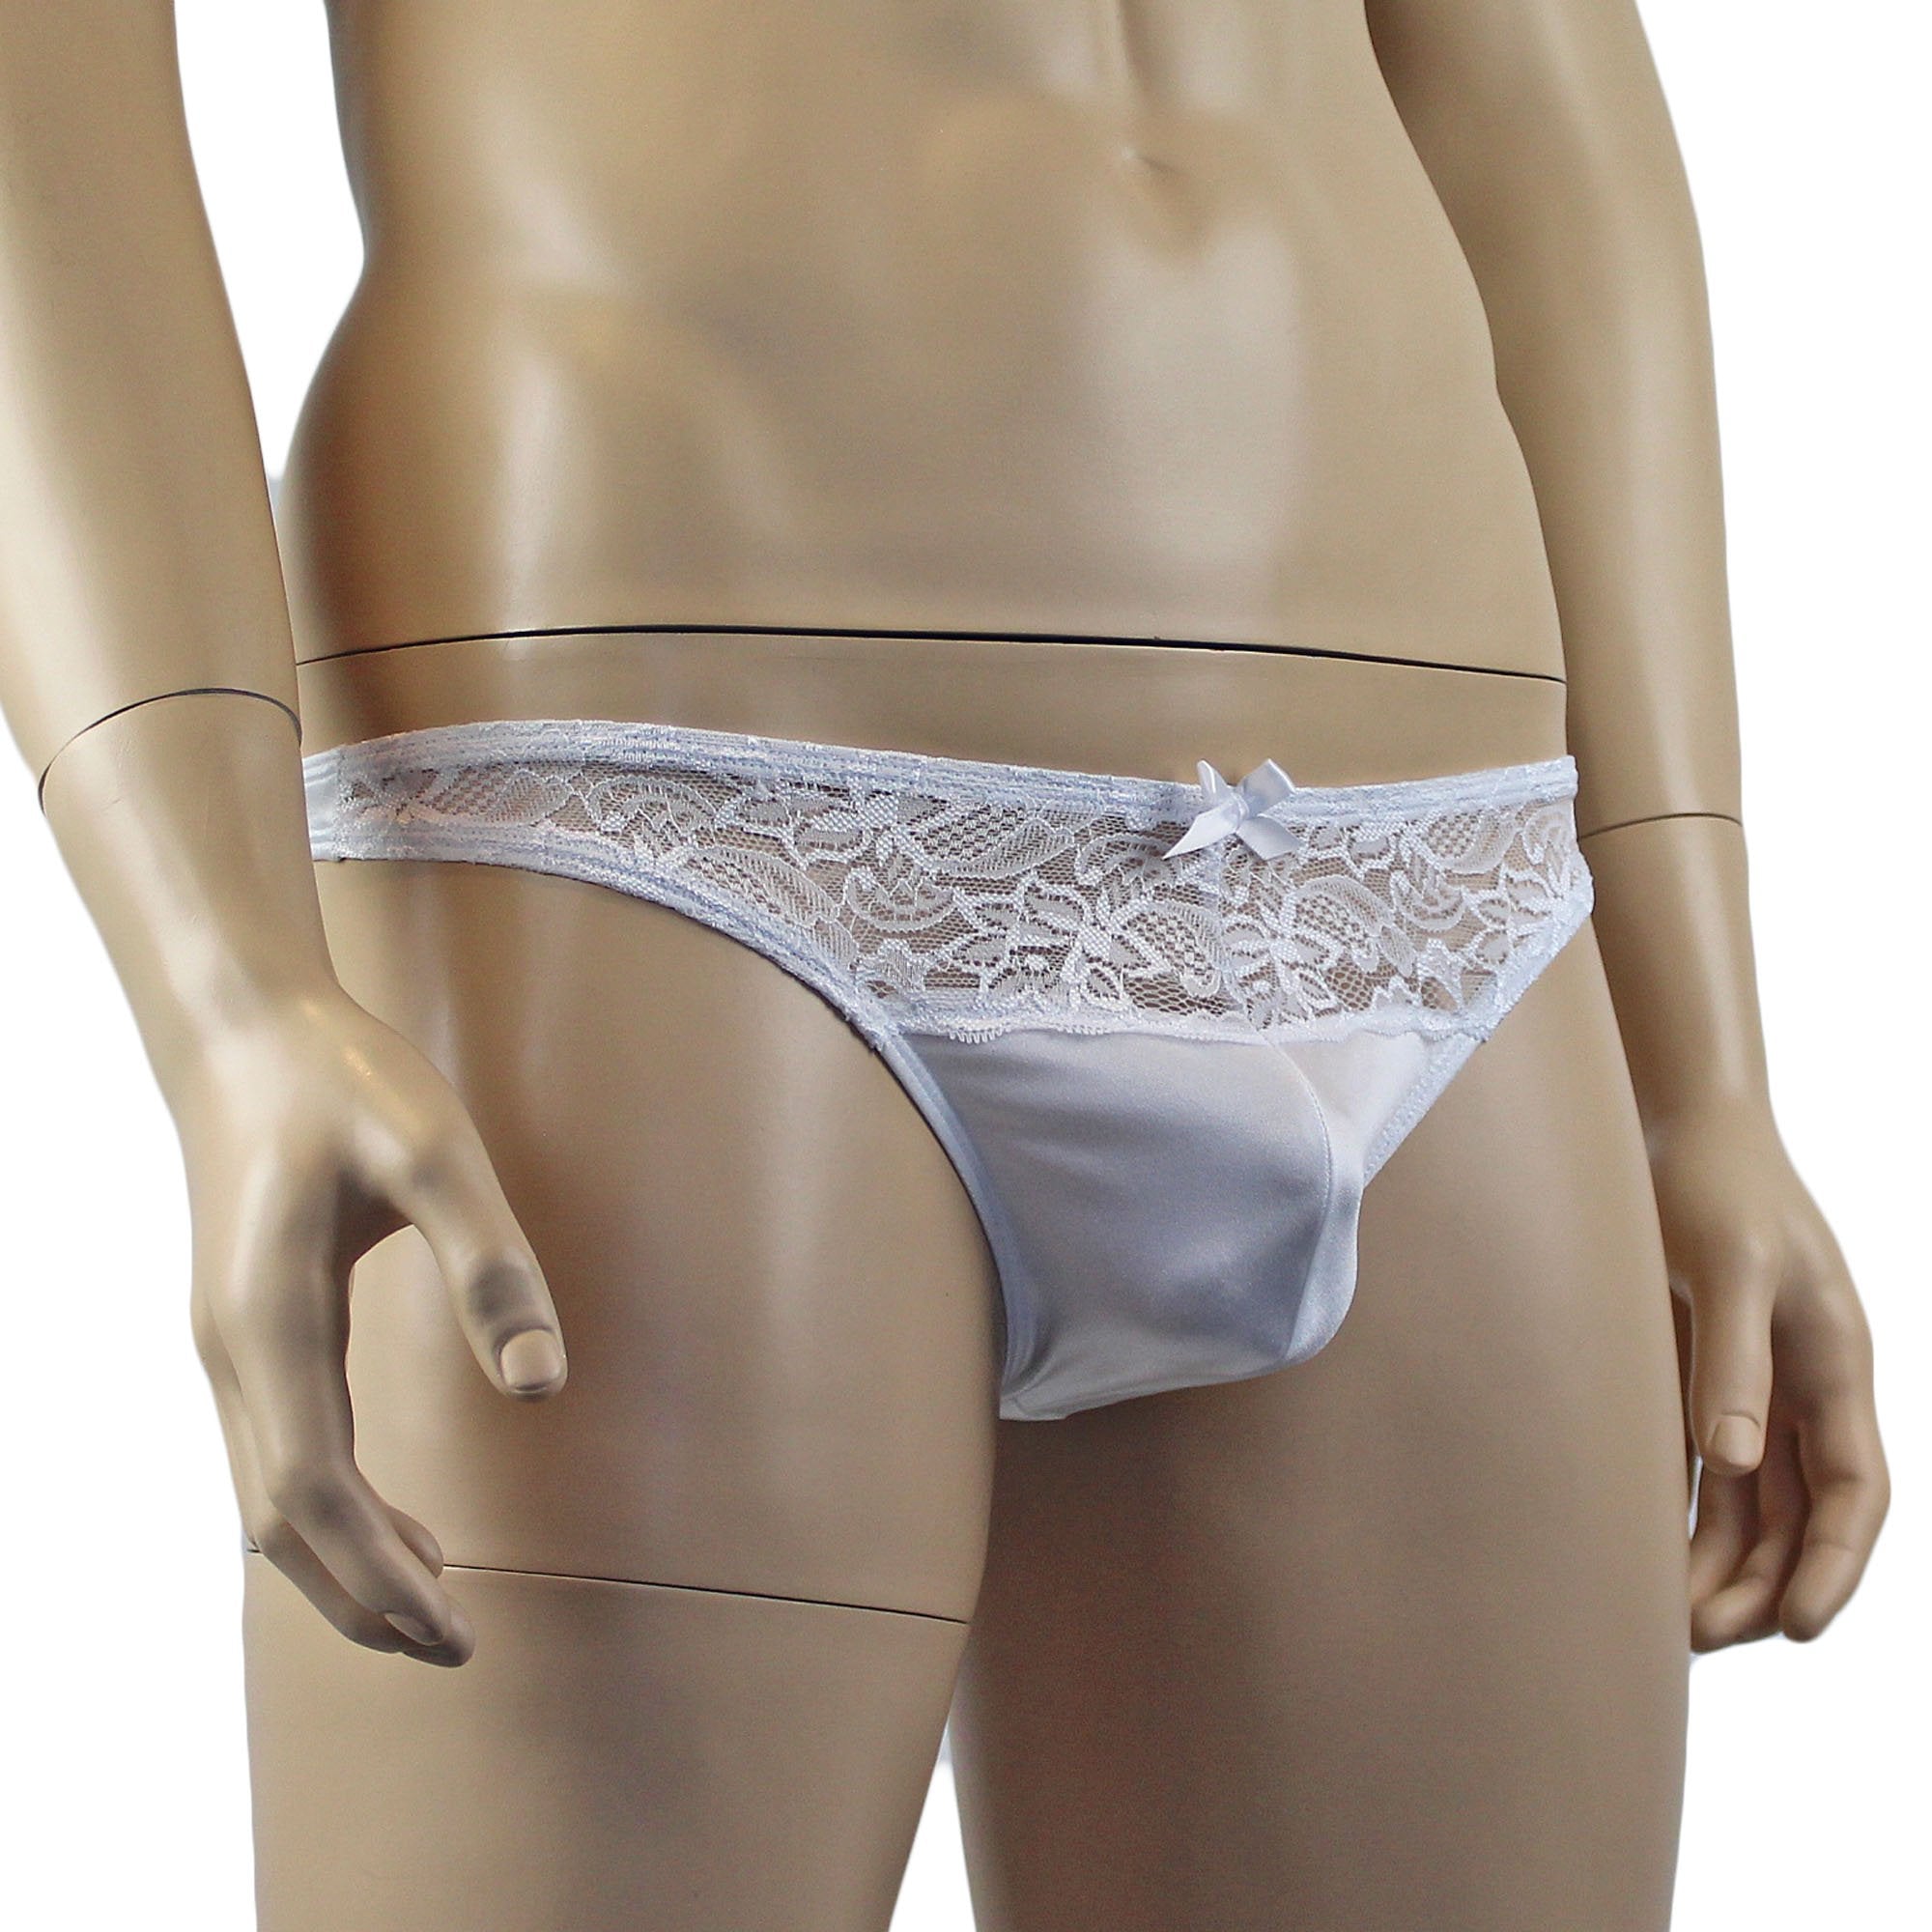 Male Romance Bridal Wedding G string Thong with Clip On Veil Underwear Lingerie White